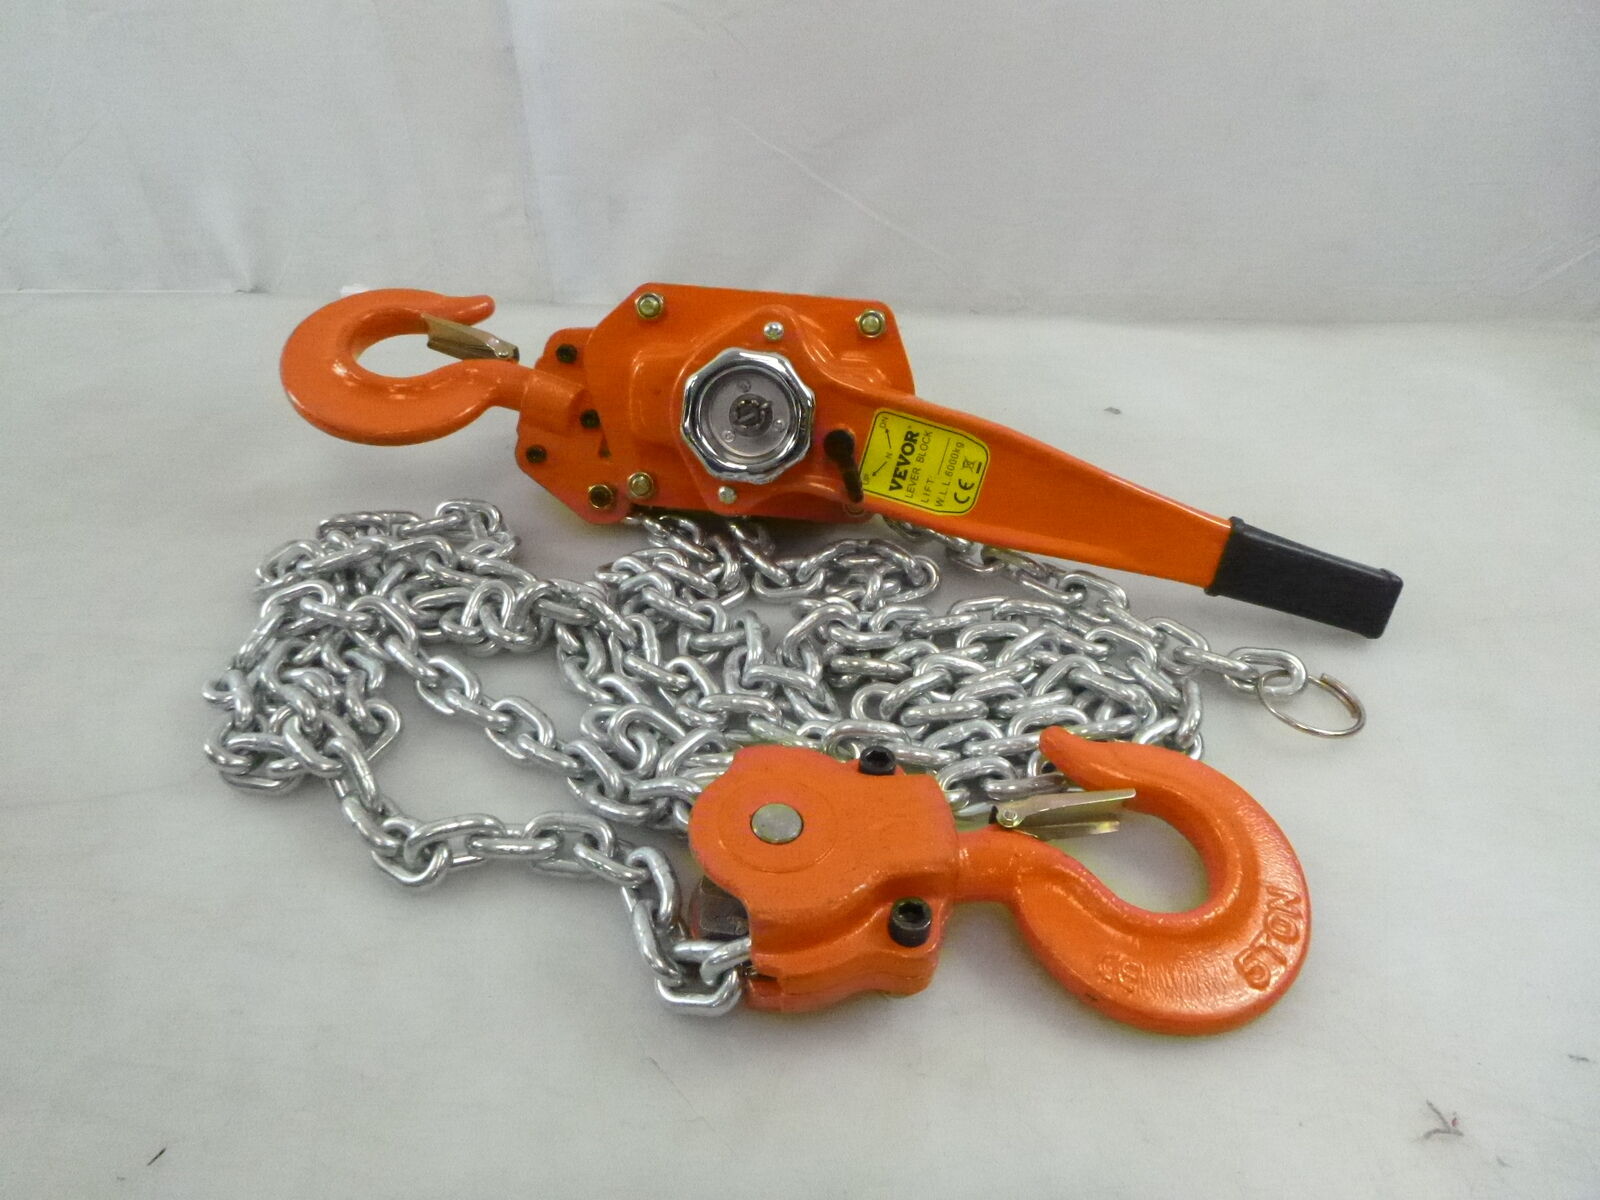 6 Ton Lever Block Chain Hoist Ratchet Type G80 20ft Chain Hook W/ Safety Latch